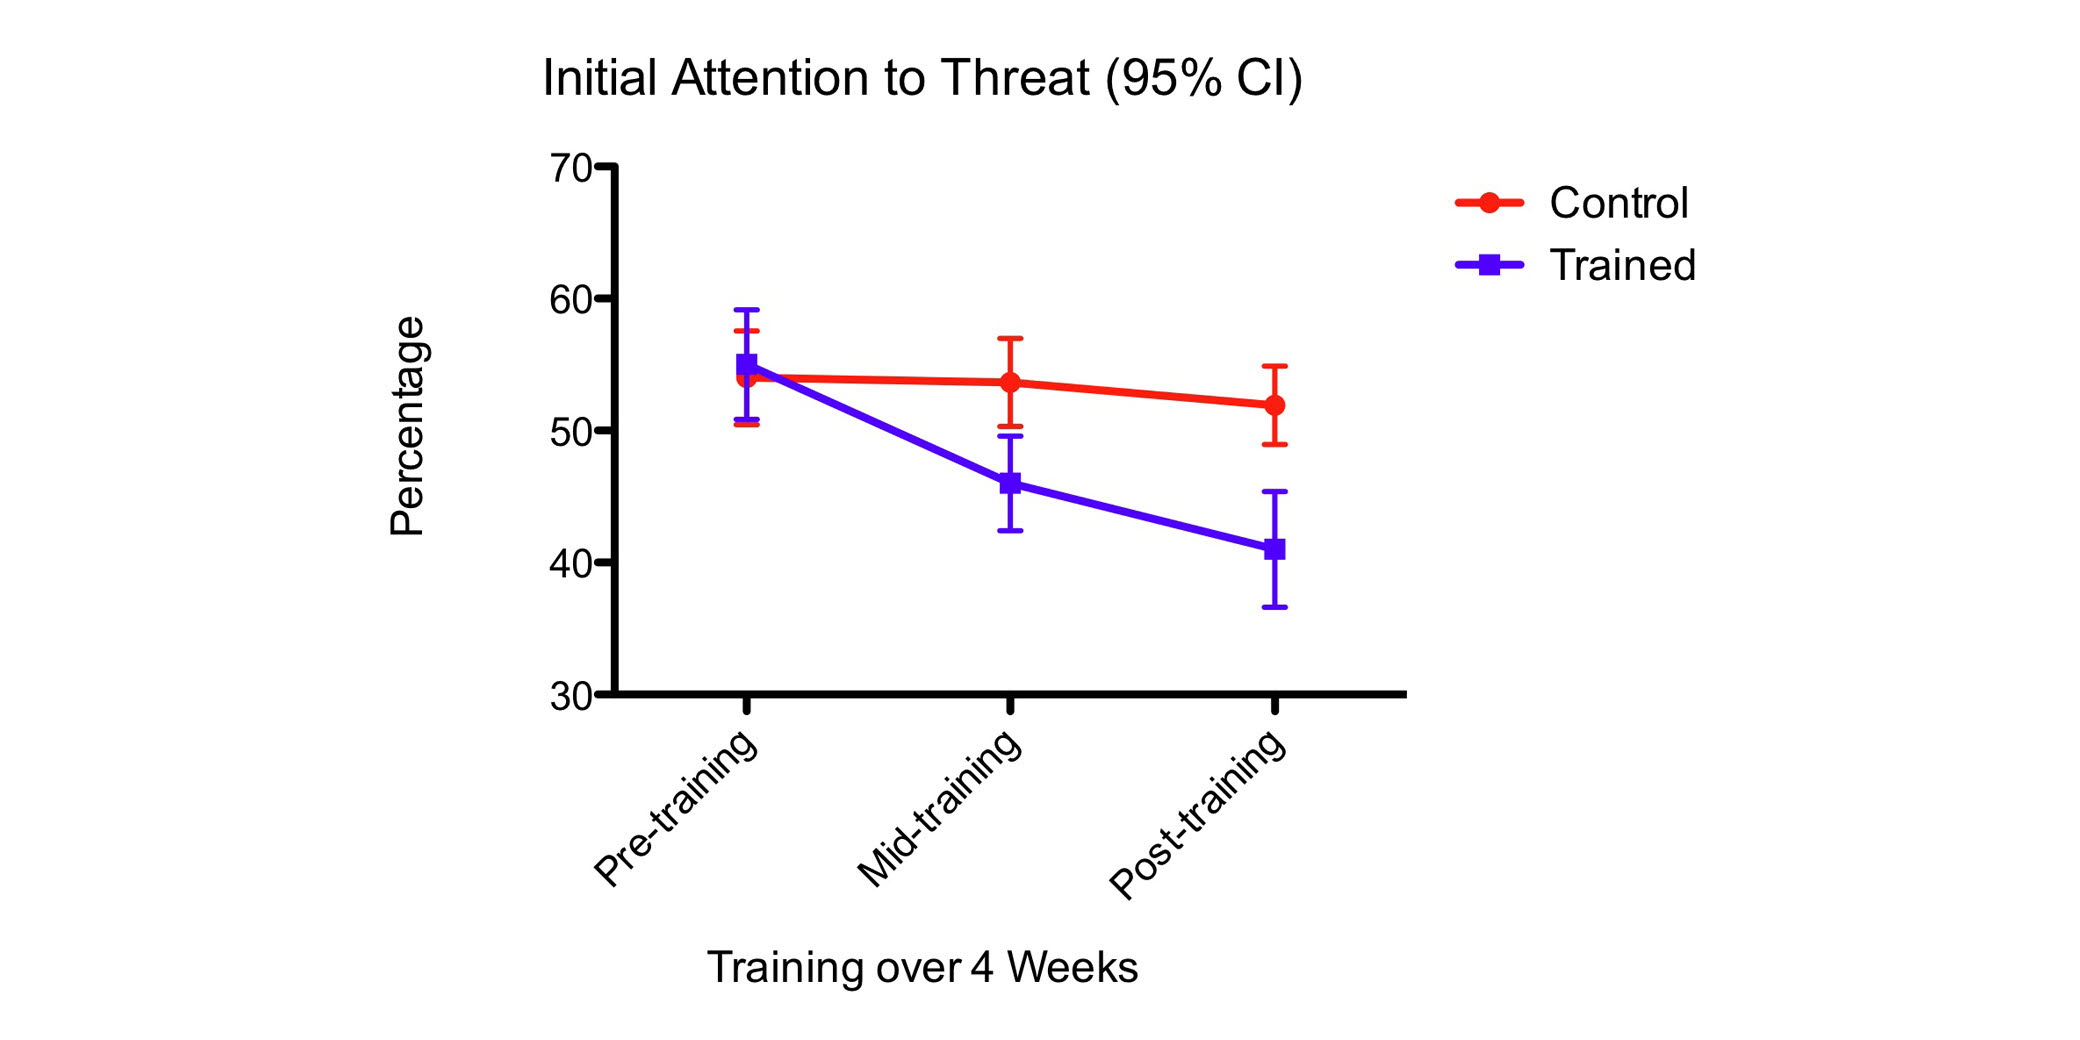 A graph showing an initial attention threat over 4 weeks.